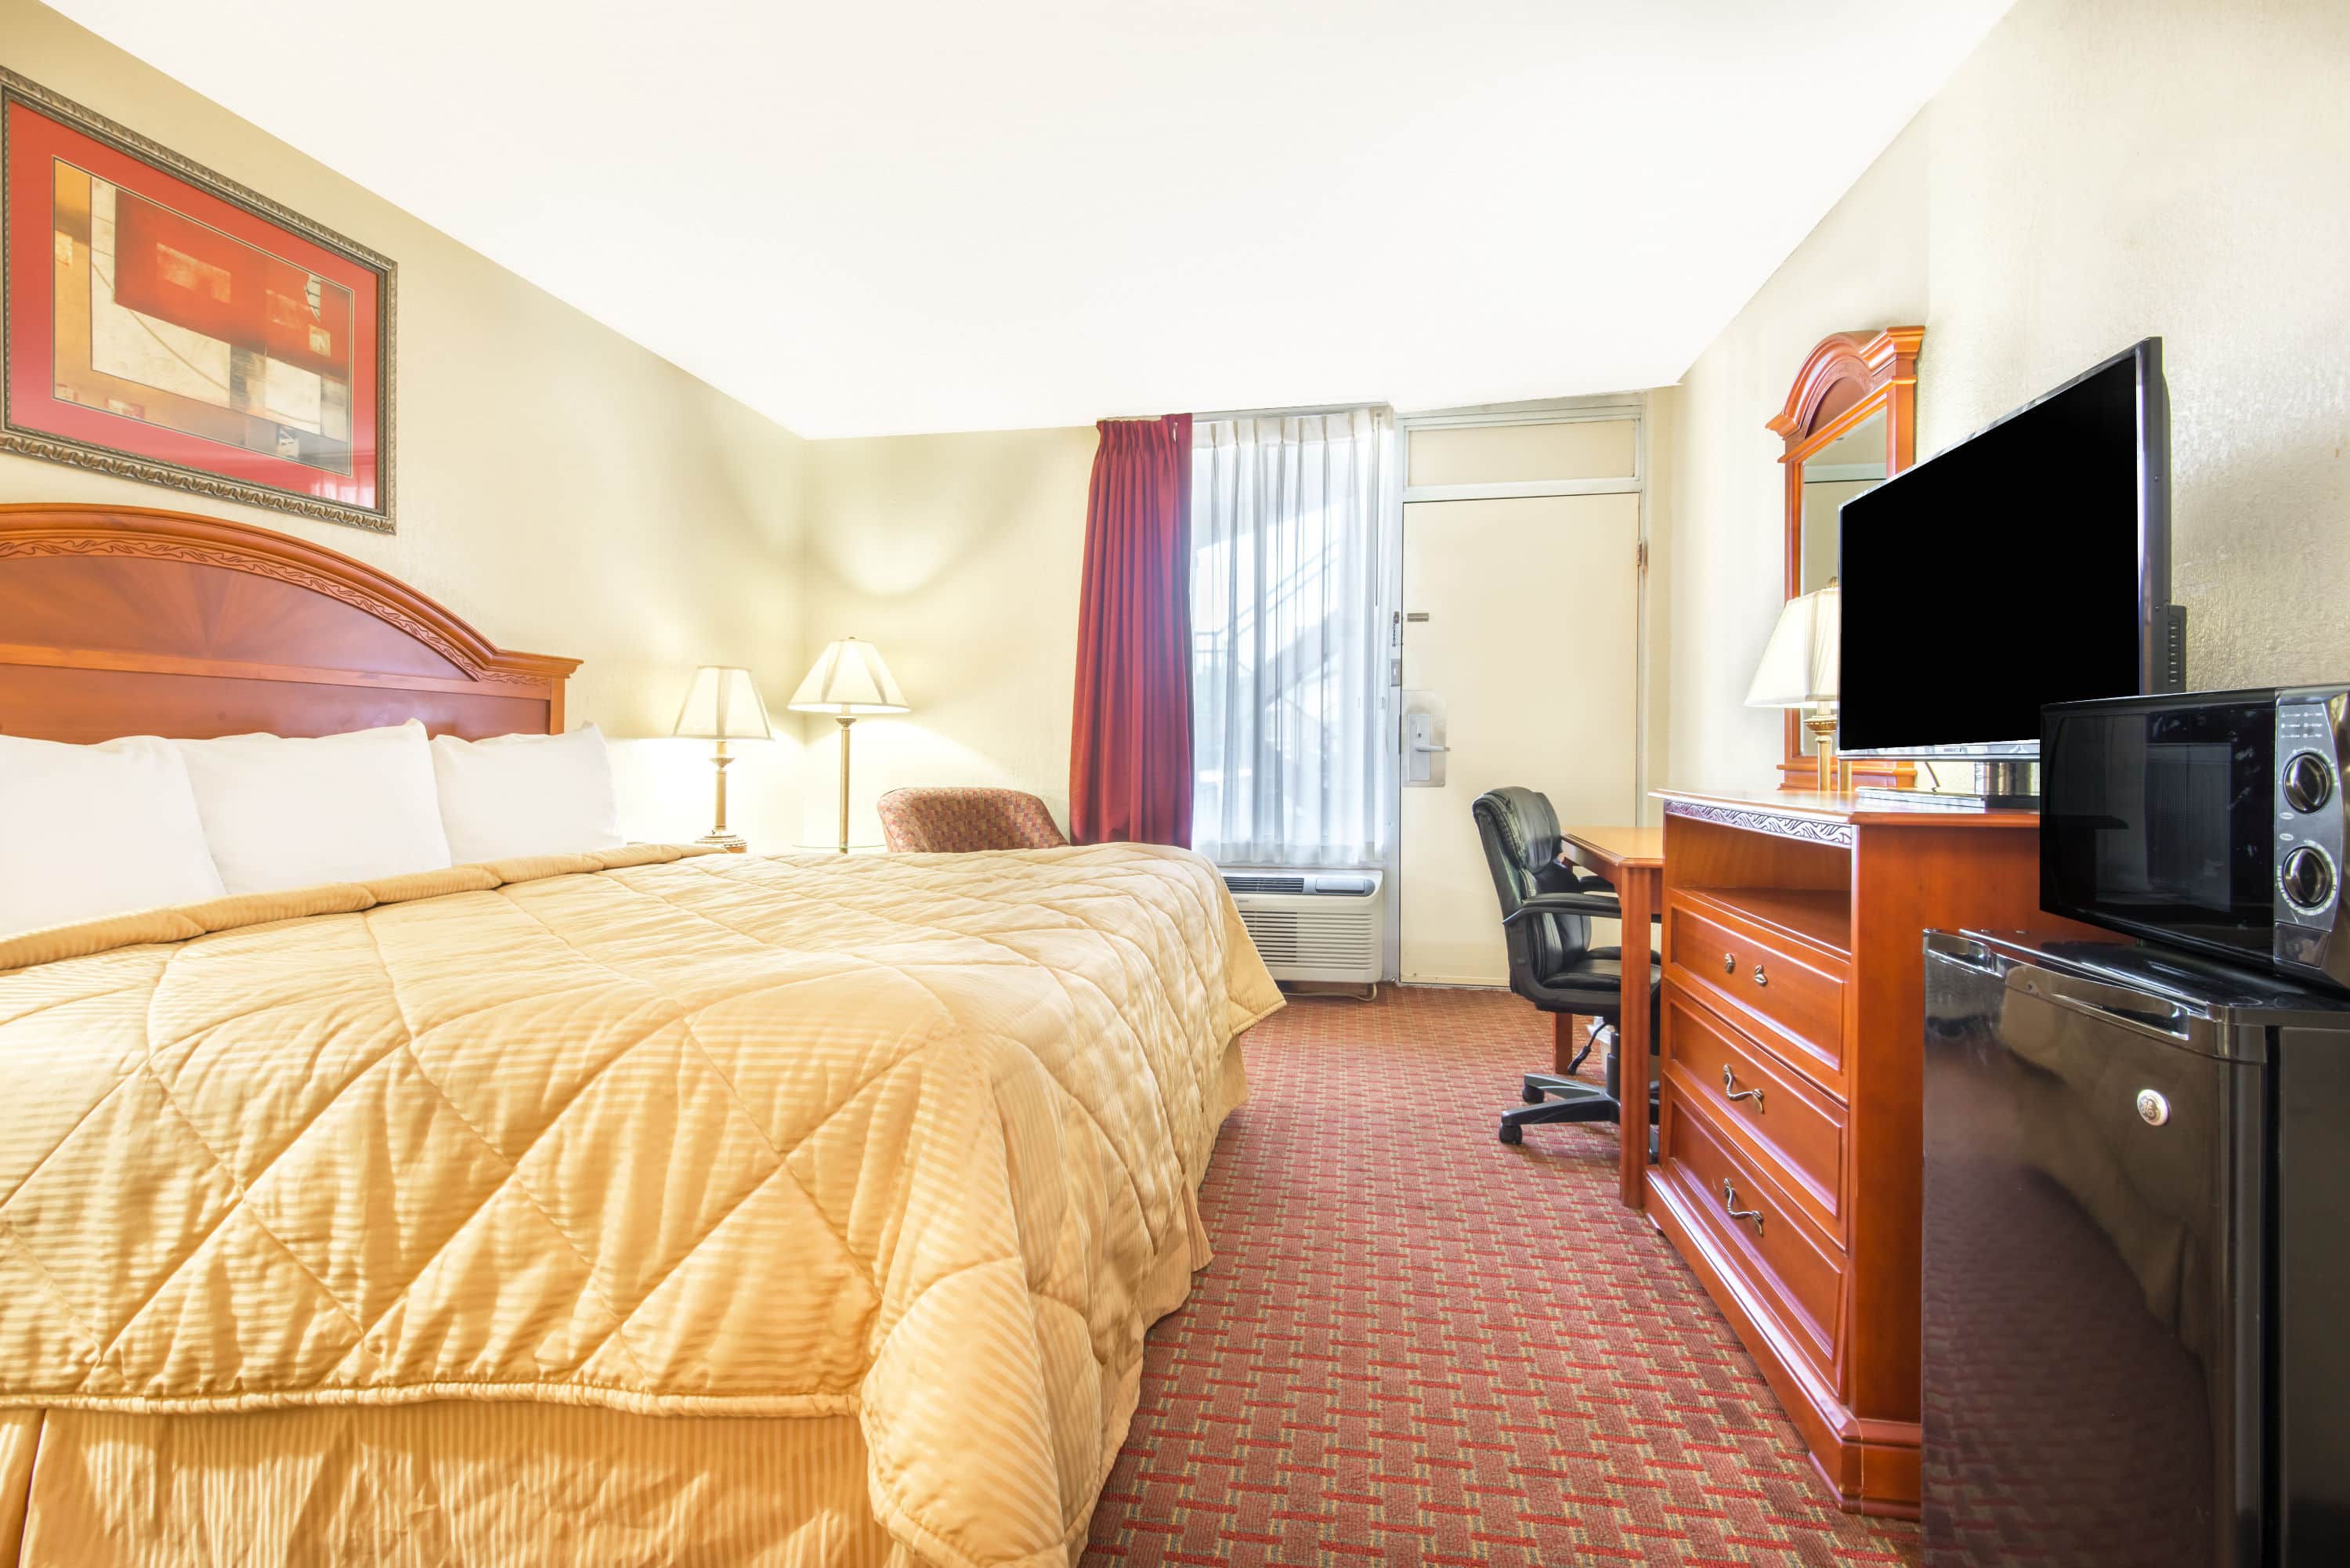 Discount [60% Off] Days Inn Shorter United States - Hotel Near Me | Hotel Book Expedia